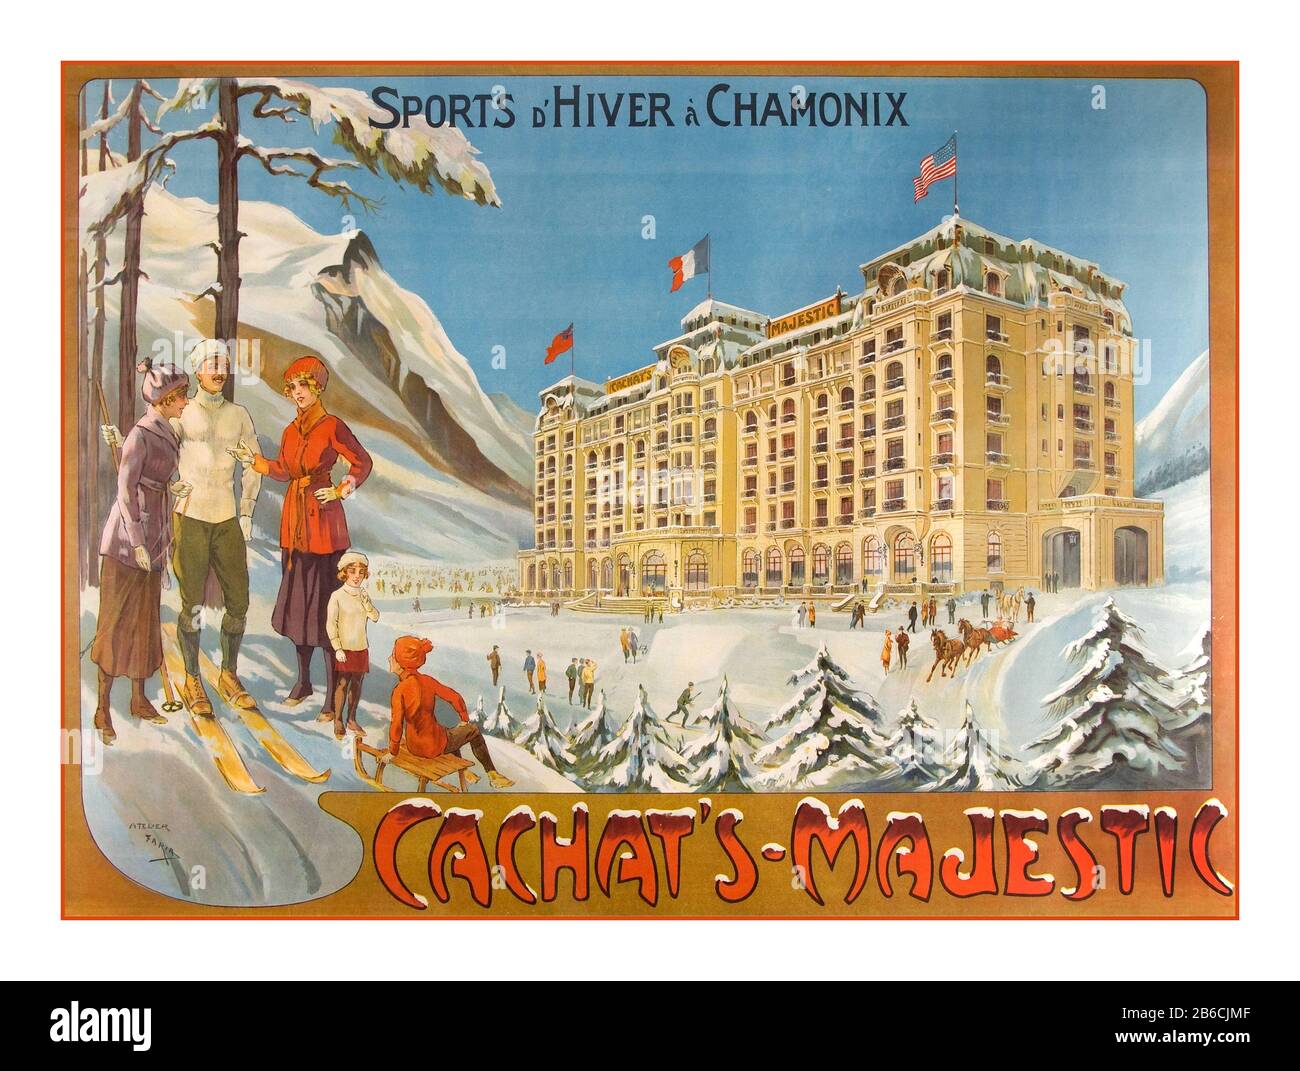 Vintage Travel 1912 Hotel poster for winter ‘sports d’Hiver a Chamonix’  Cachat's-Majestic Hotel Chamonix Mont Blanc France Aragonese de Faria (1849-1911) Cachats Majestic, Stock Photo